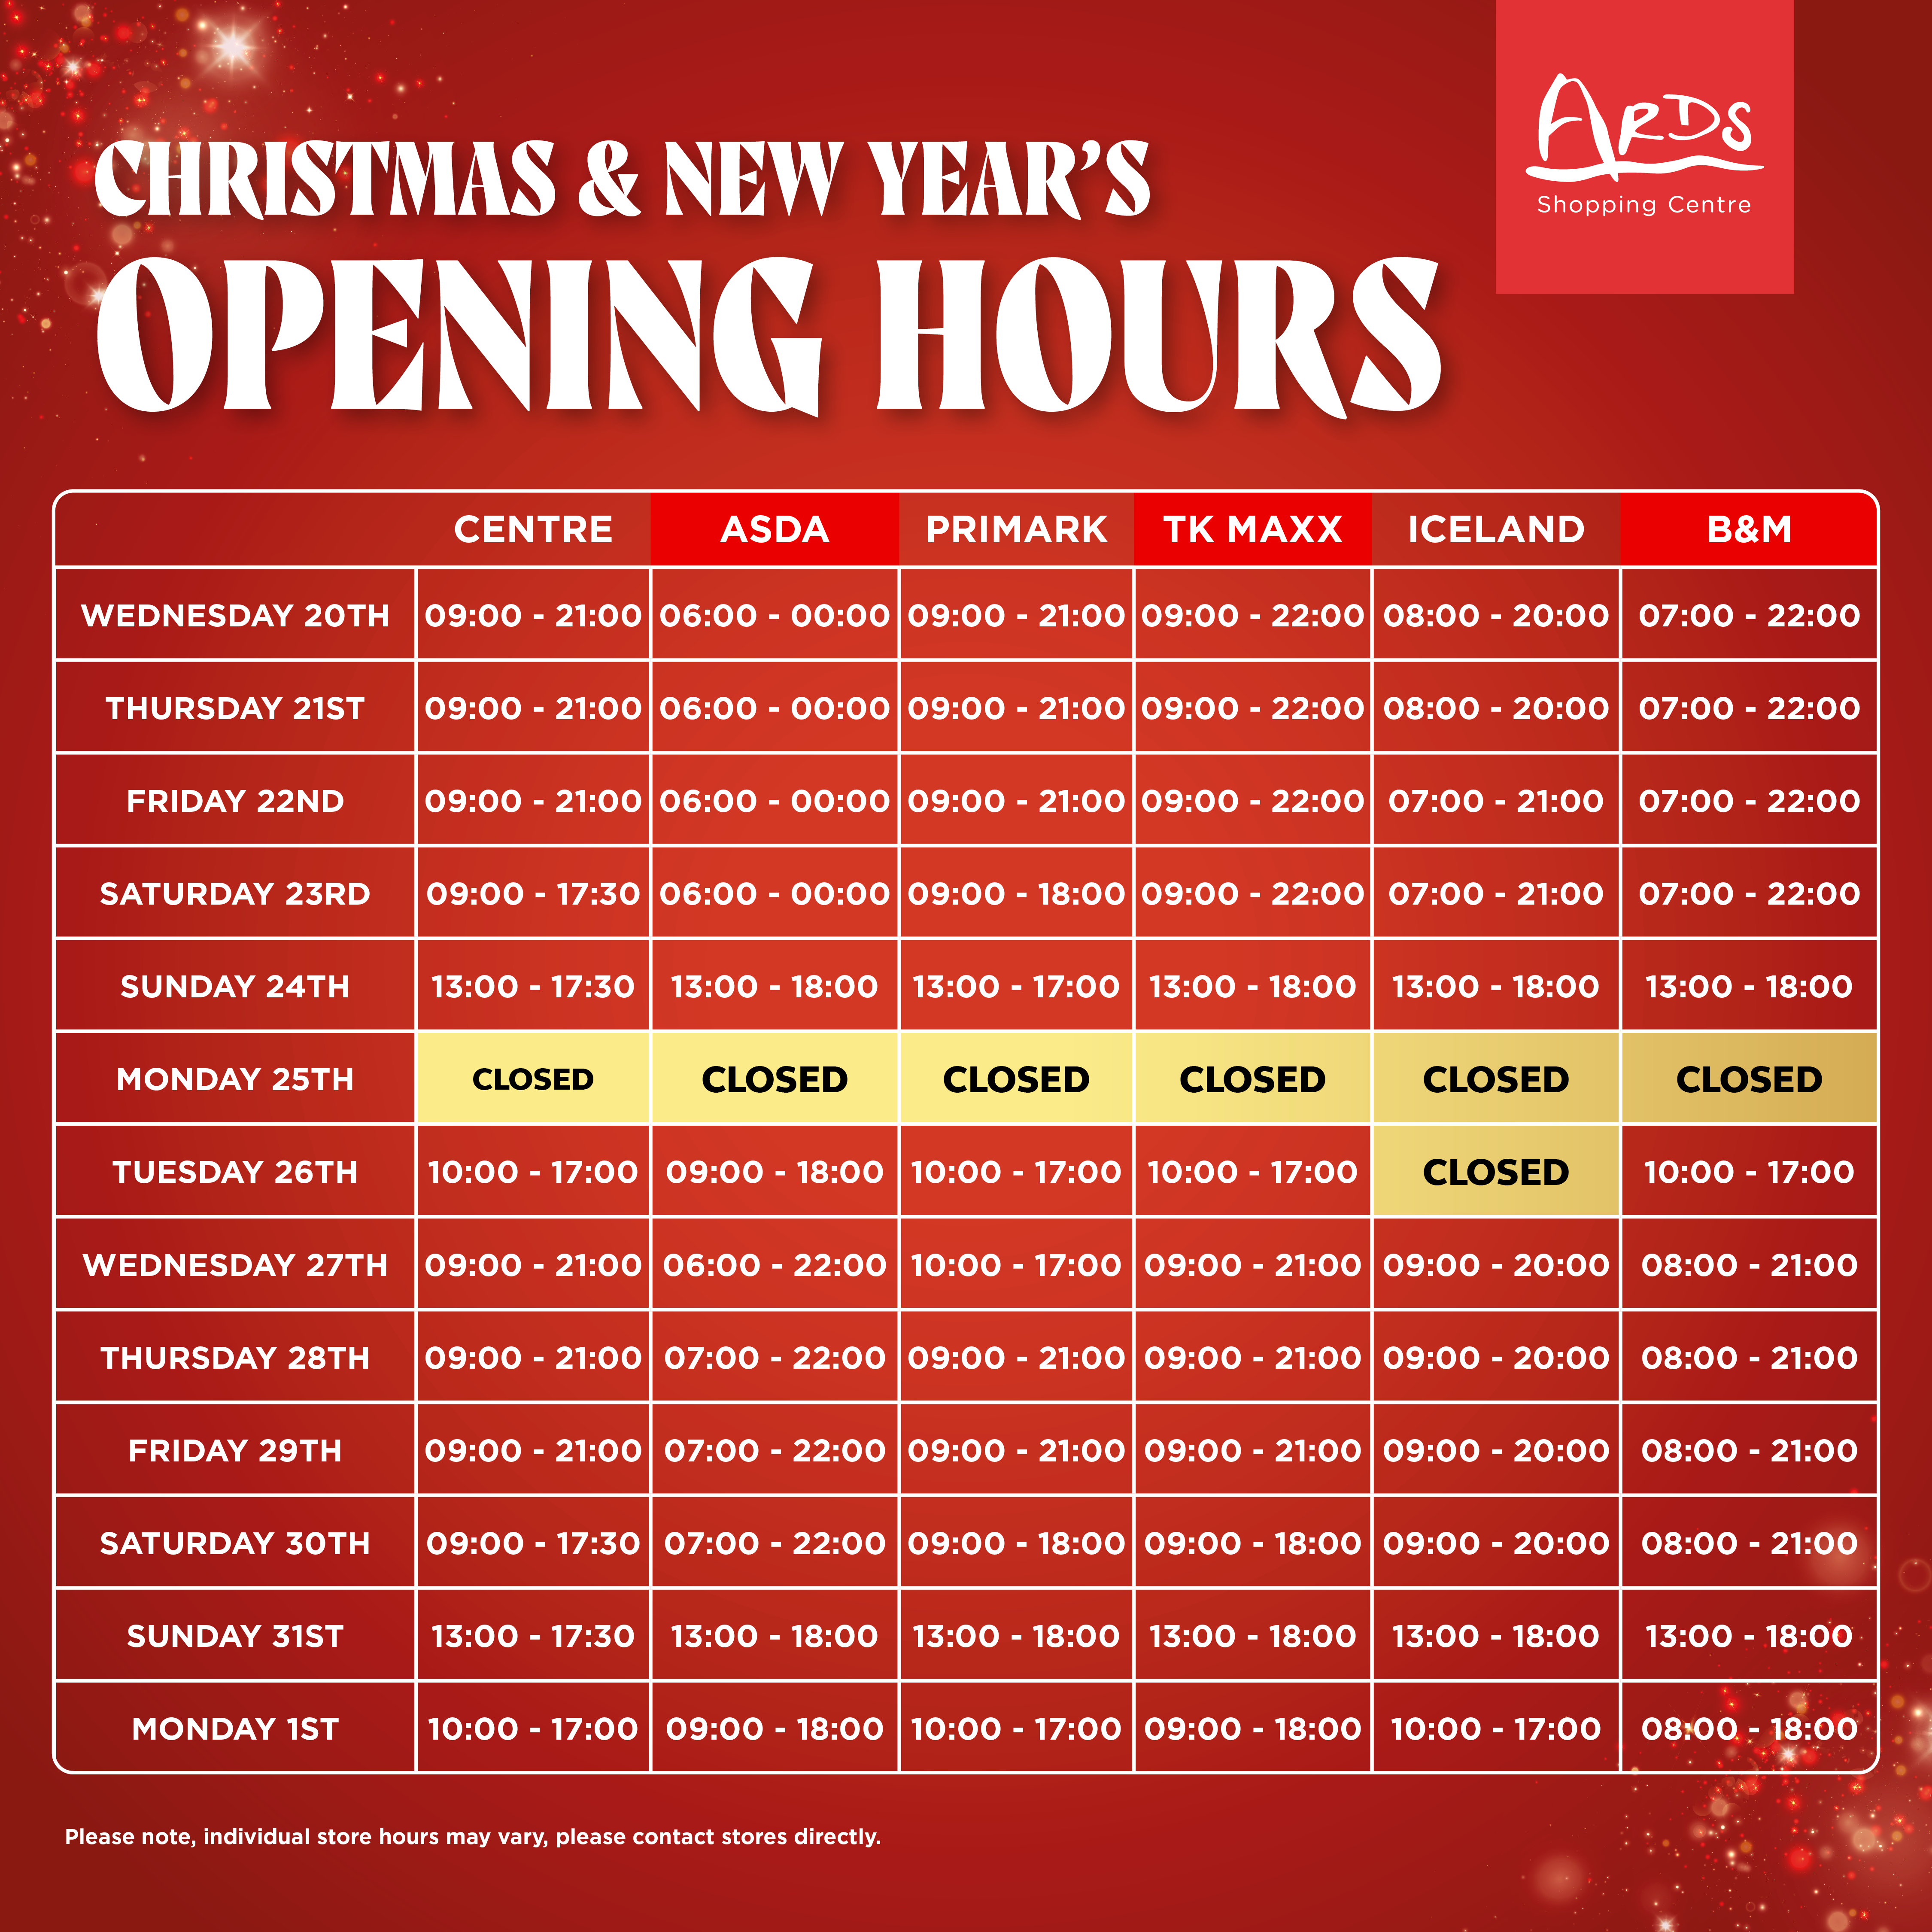 Ards' Christmas & New Year's Opening Hours